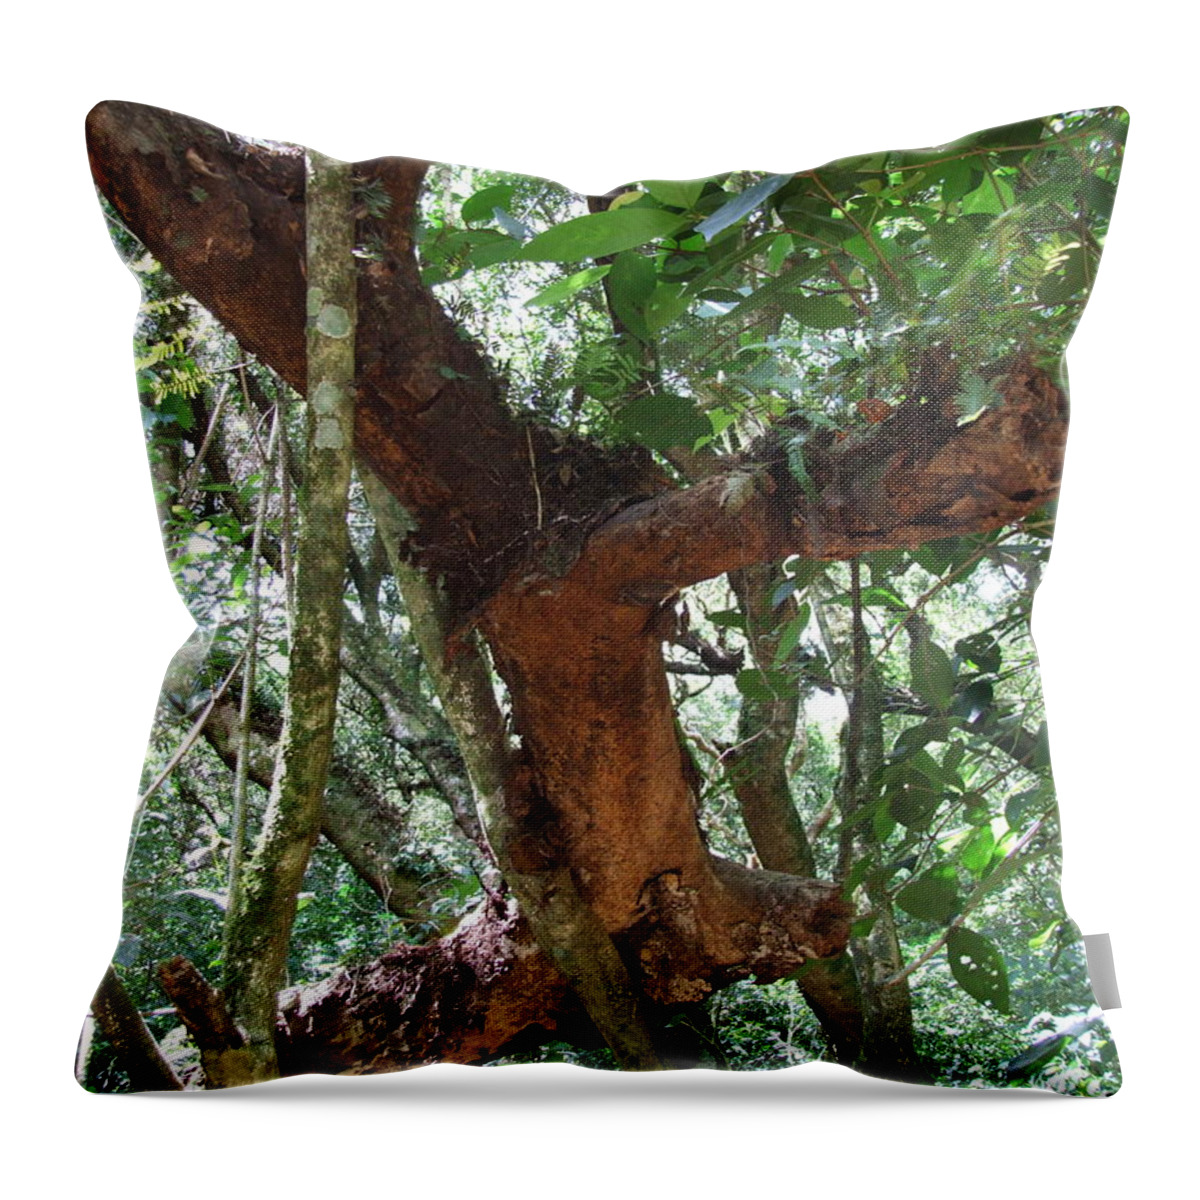 Flower Throw Pillow featuring the photograph Rama by Rebeca Segura